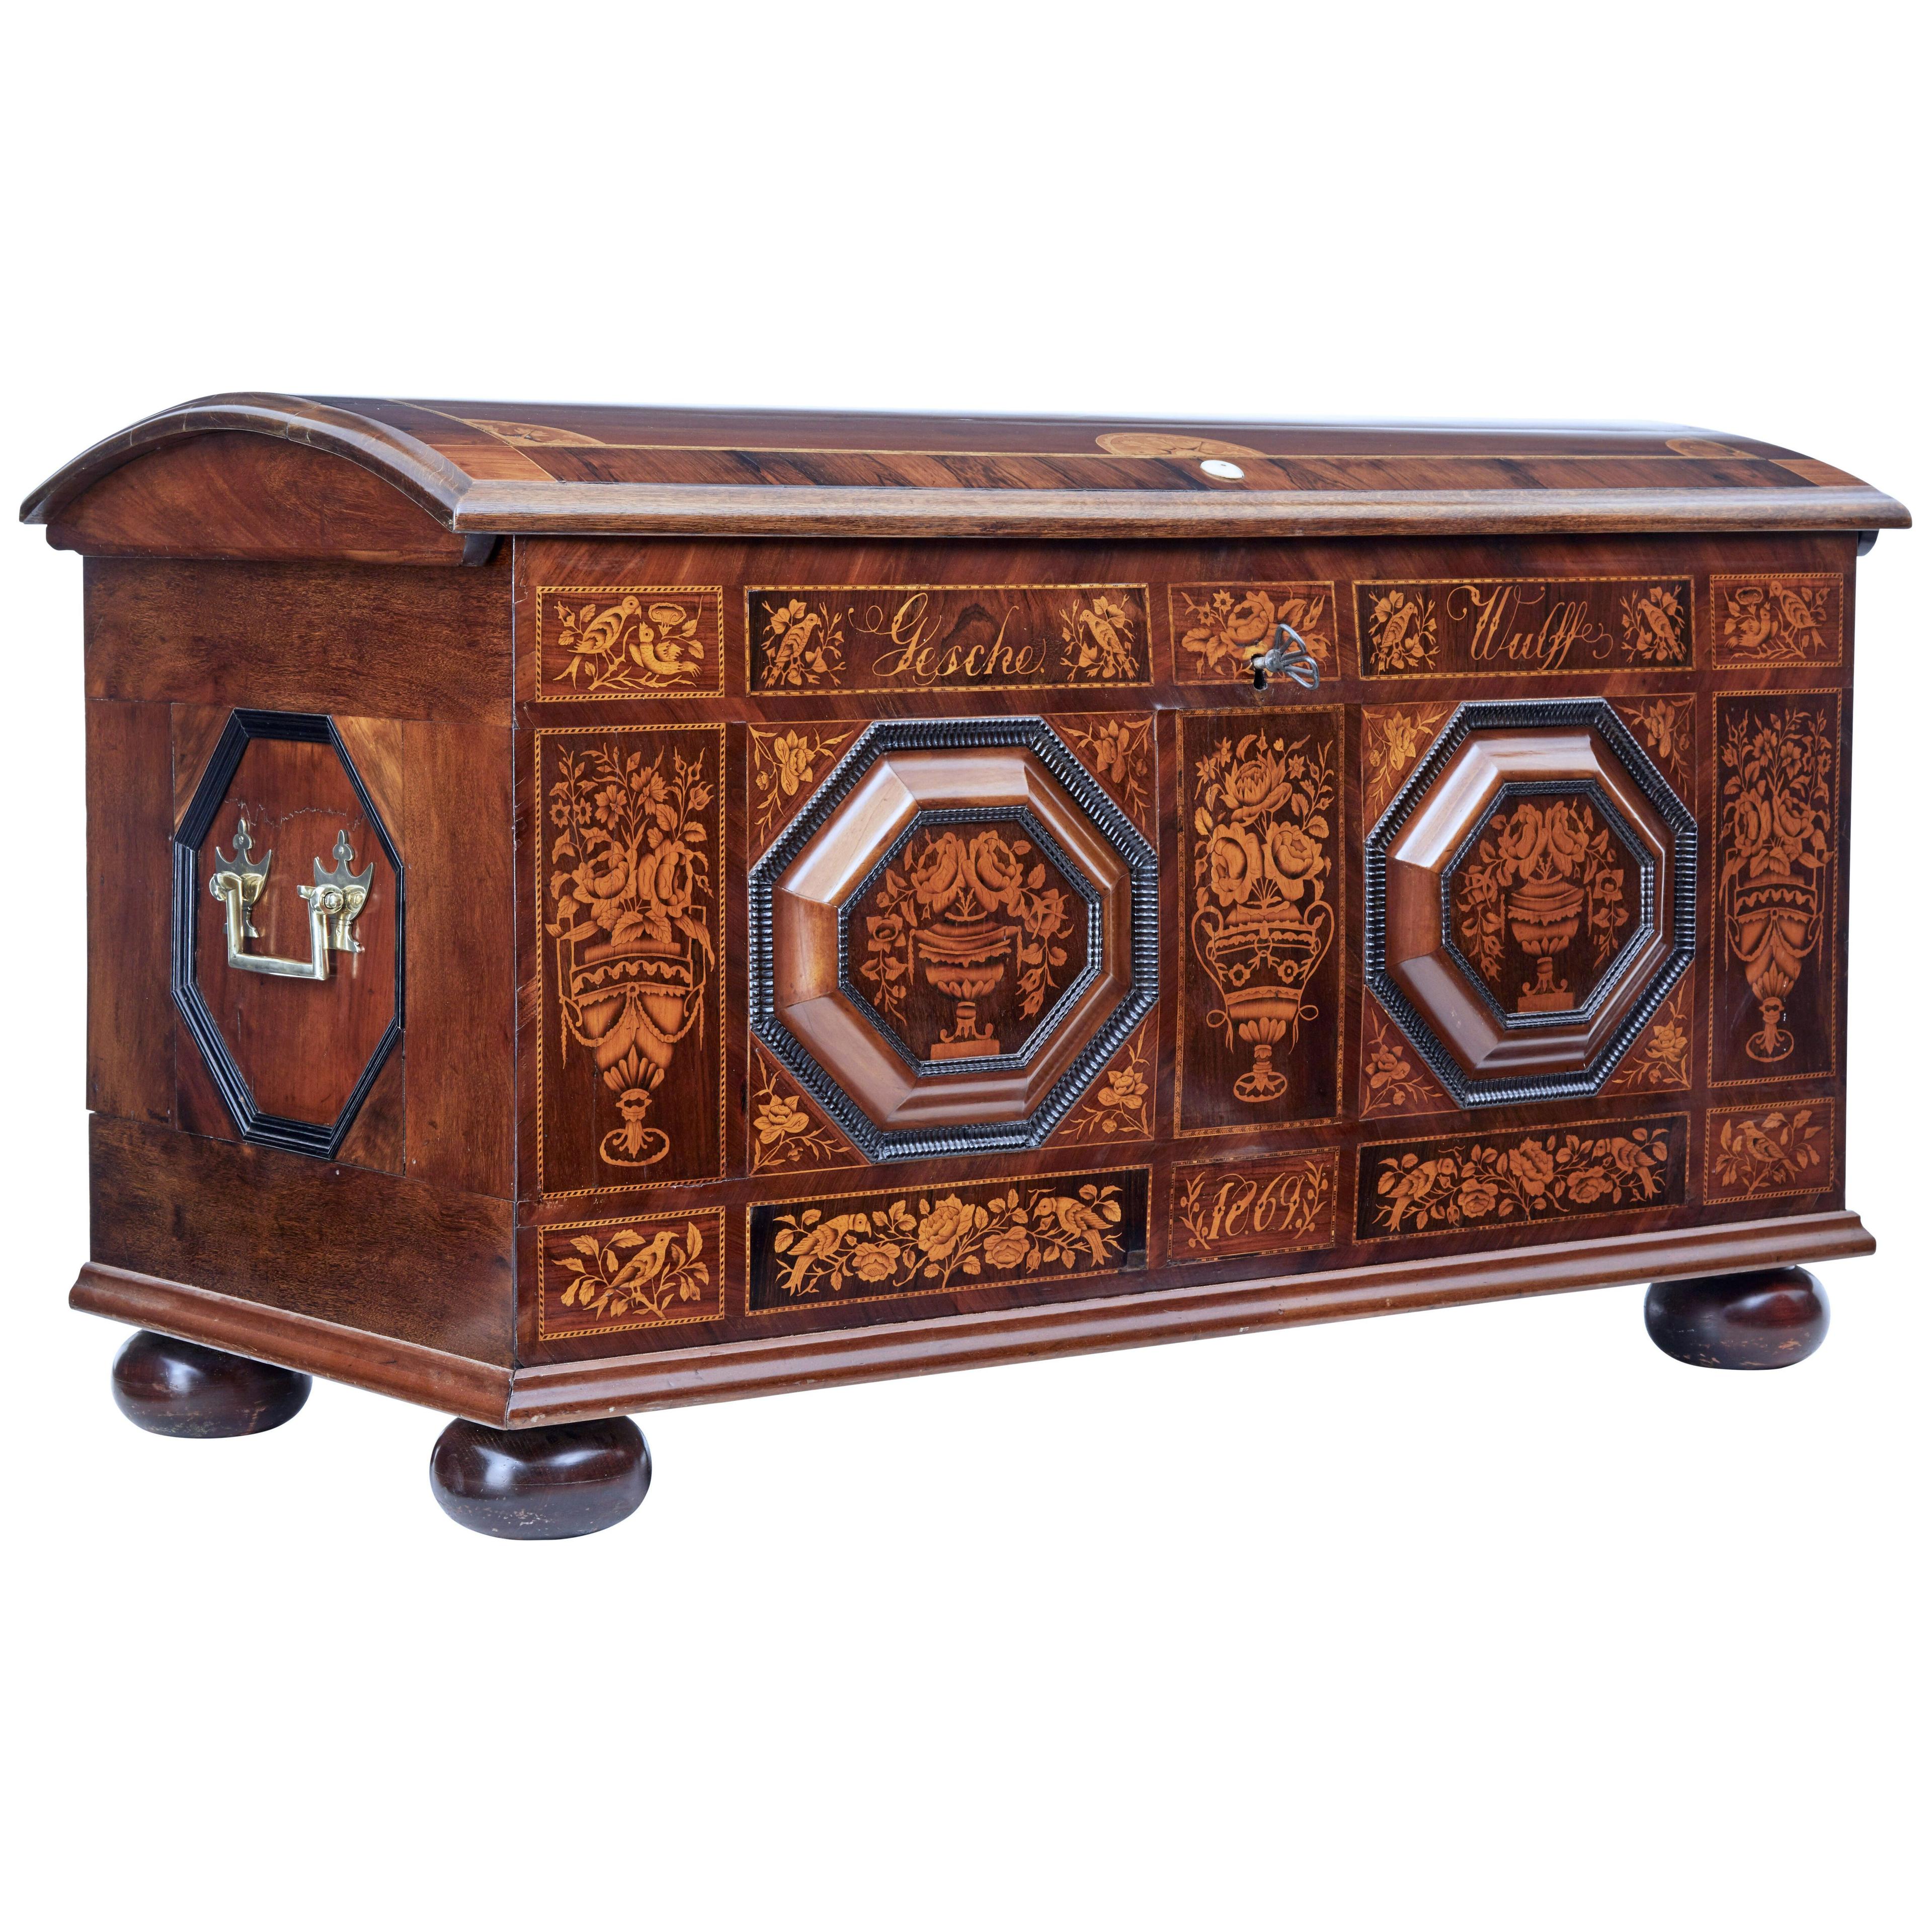     MID 19TH CENTURY PROFUSELY INLAID CONTINENTAL WALNUT DOME CHEST